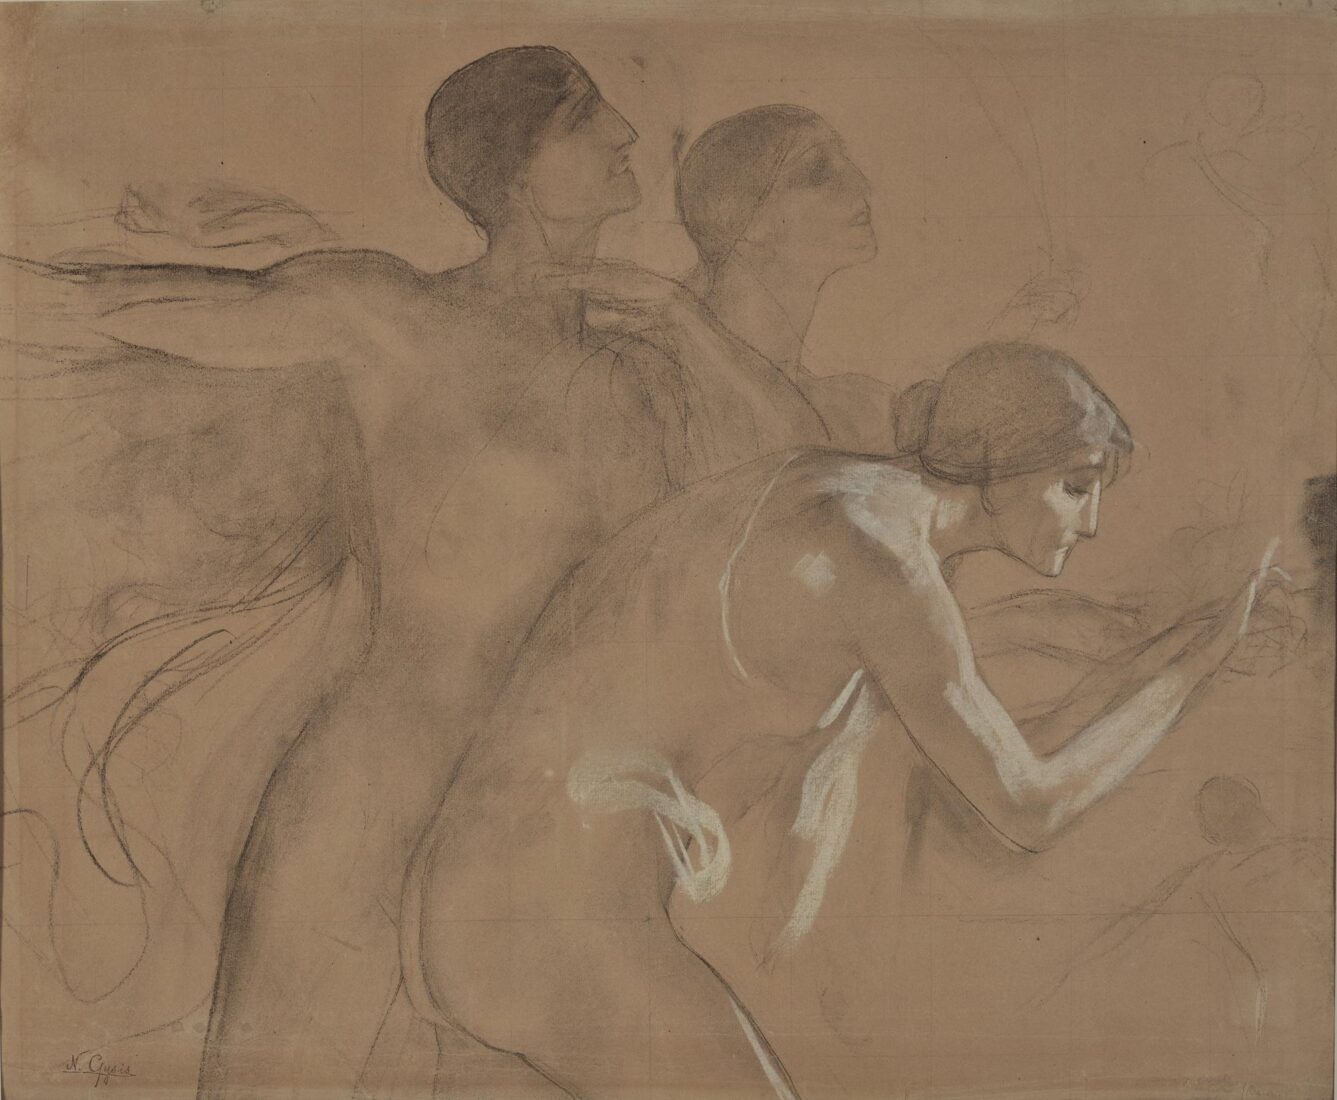 Study for the Allegorical Figures following the Chariot (“Industry”, “Trade”, the “Crafts”) - Gyzis Nikolaos